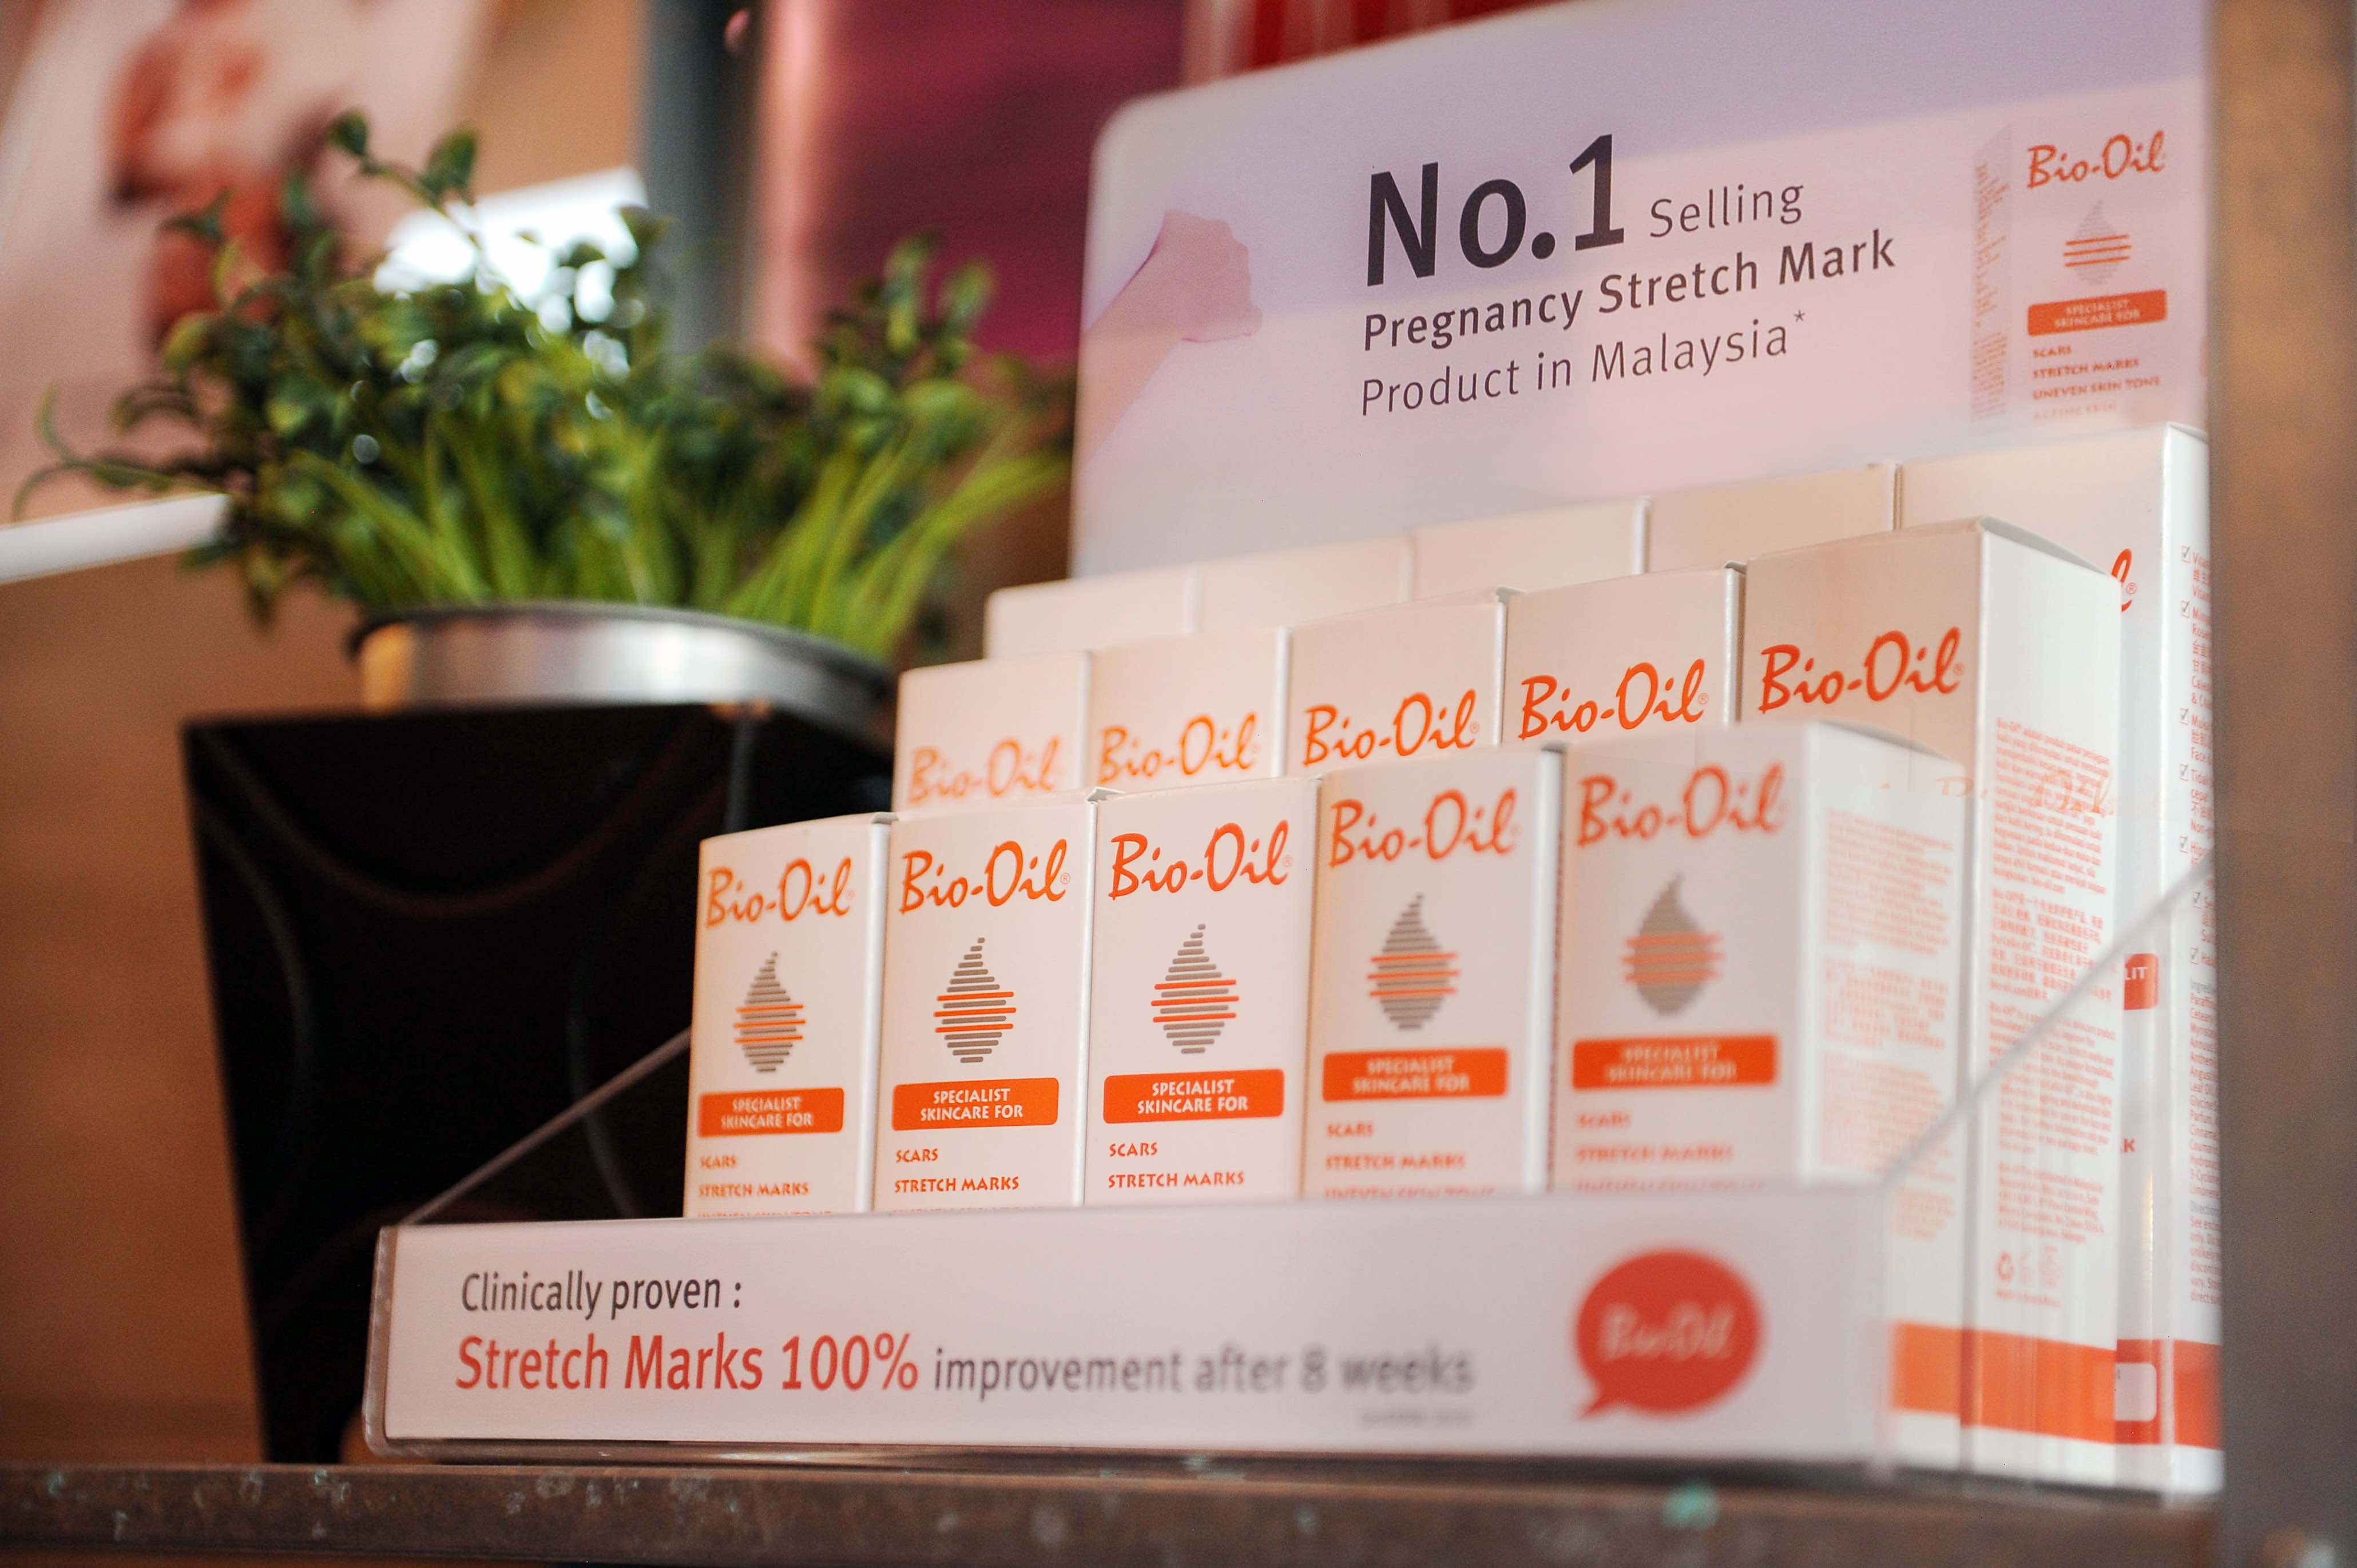 Bio-Oil, number 1 selling pregnancy stretch marks product in Malaysia